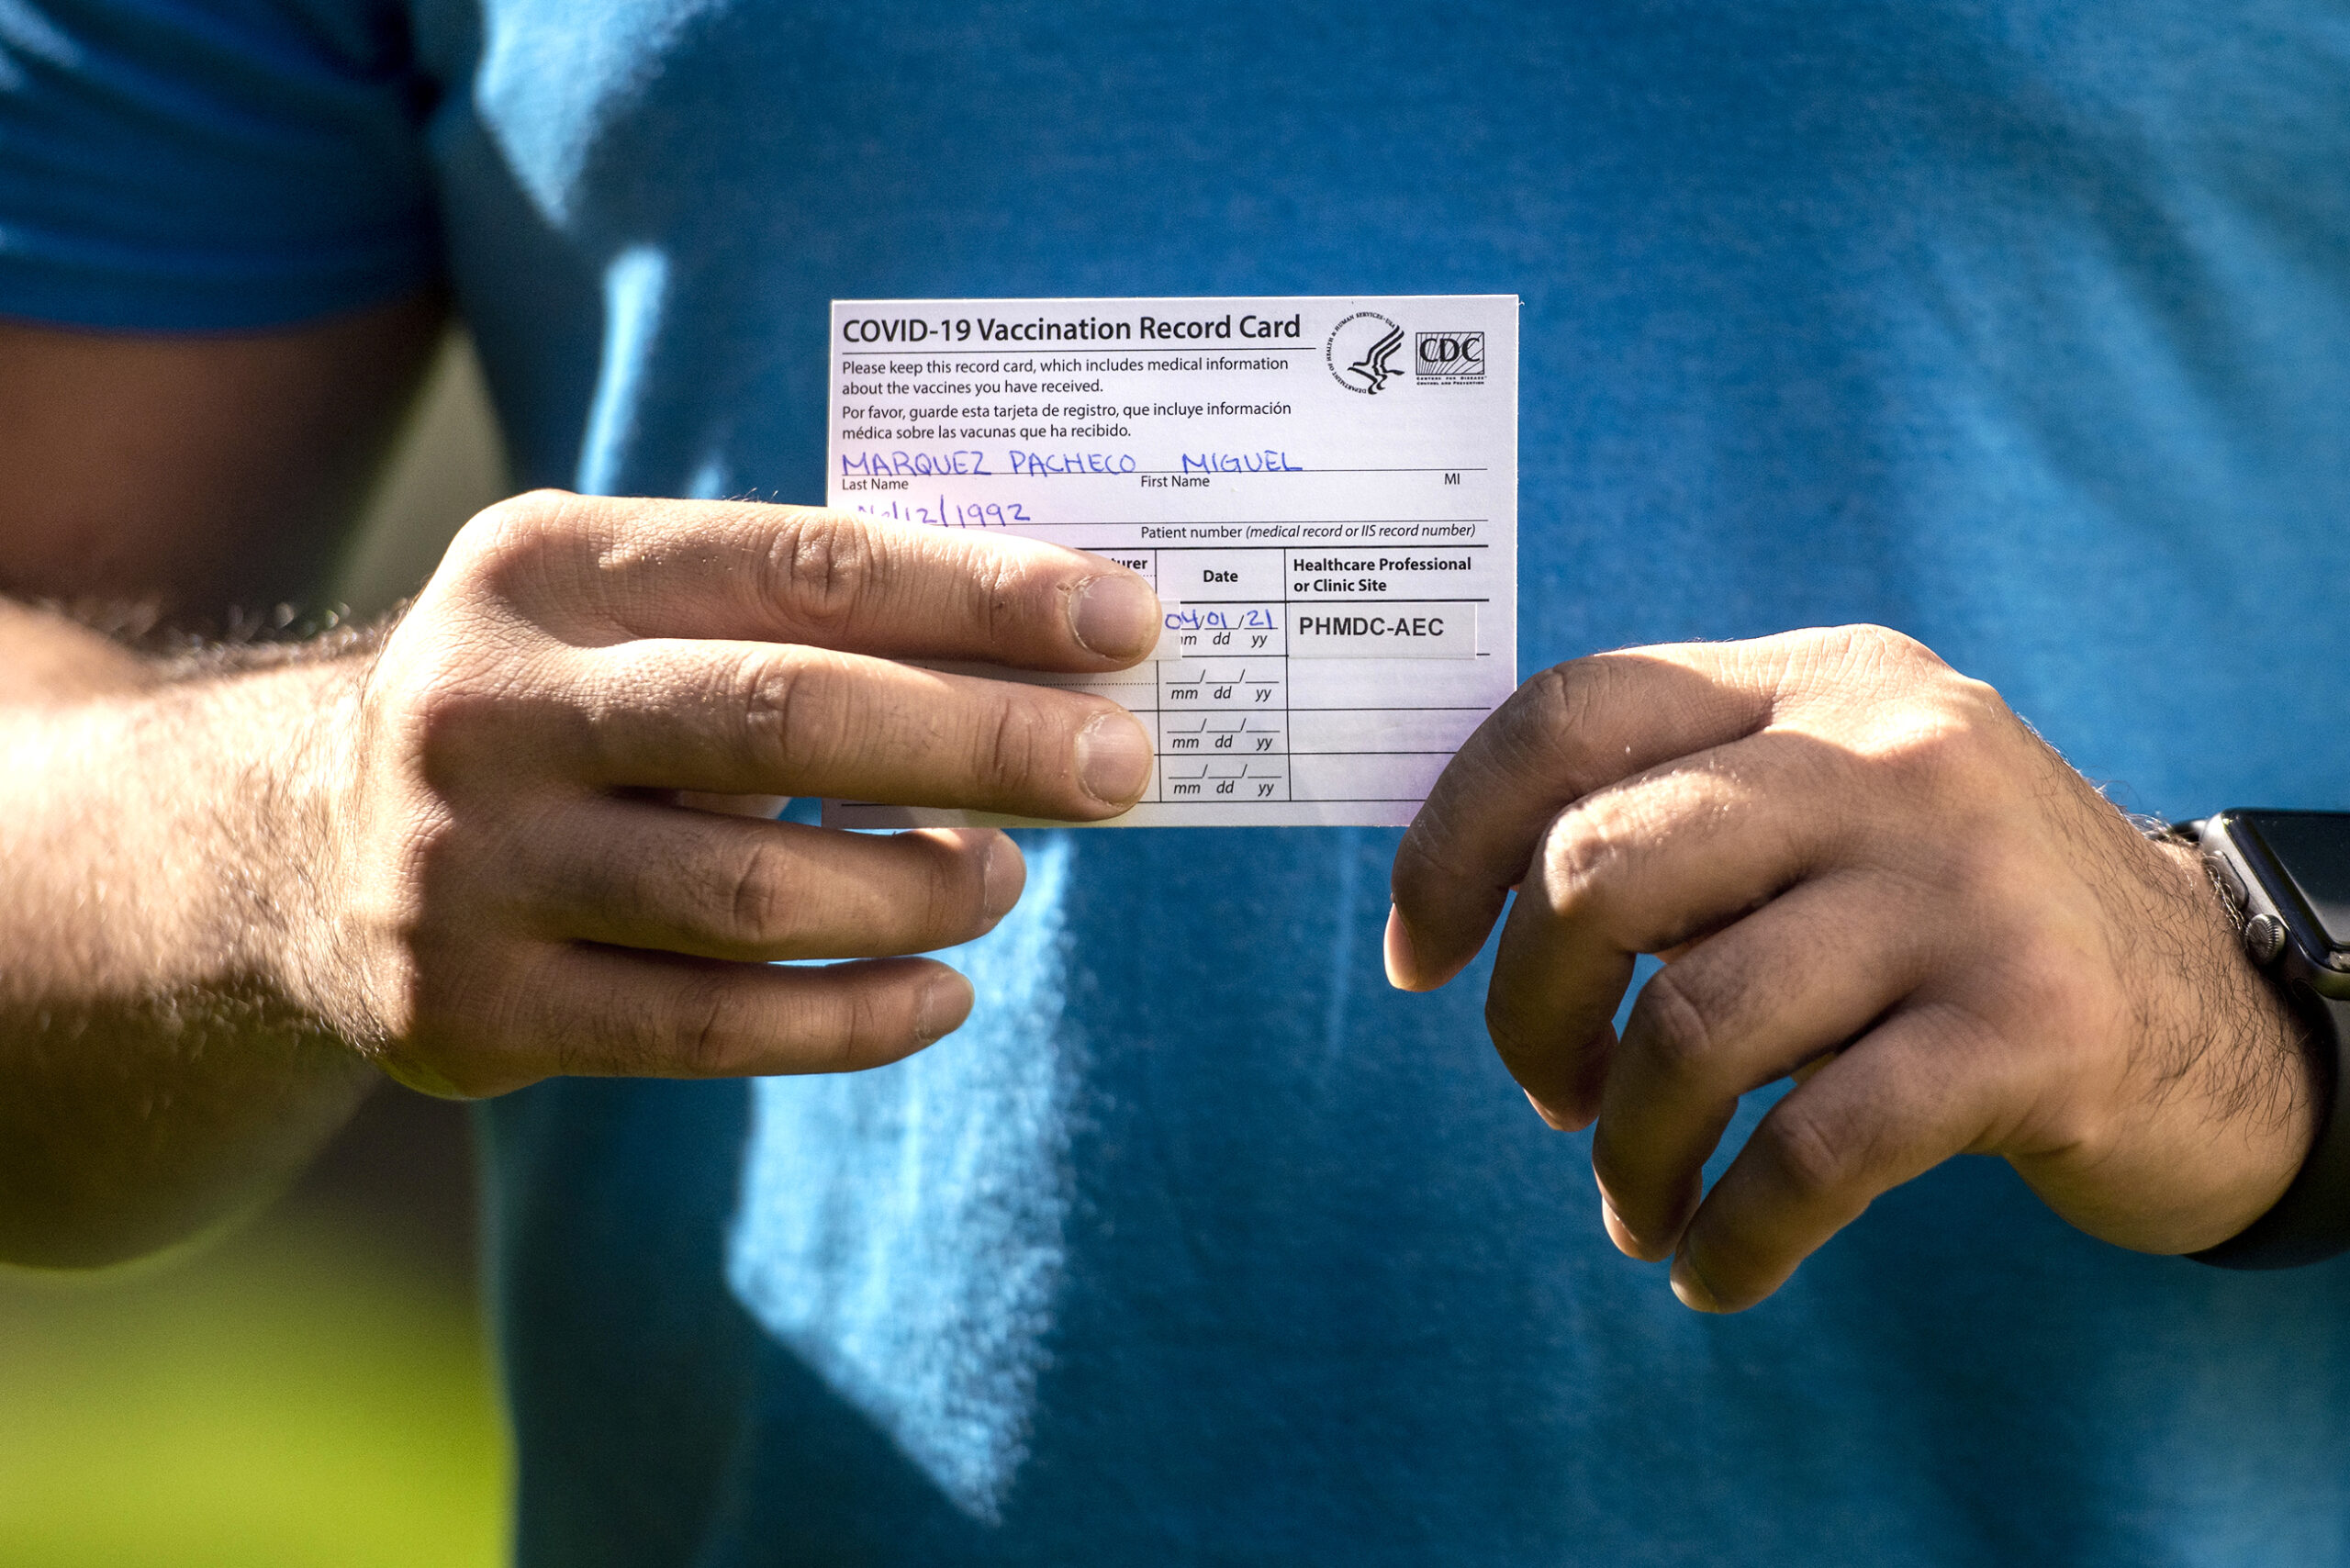 A white card with vaccine information is seen in someone's hands.